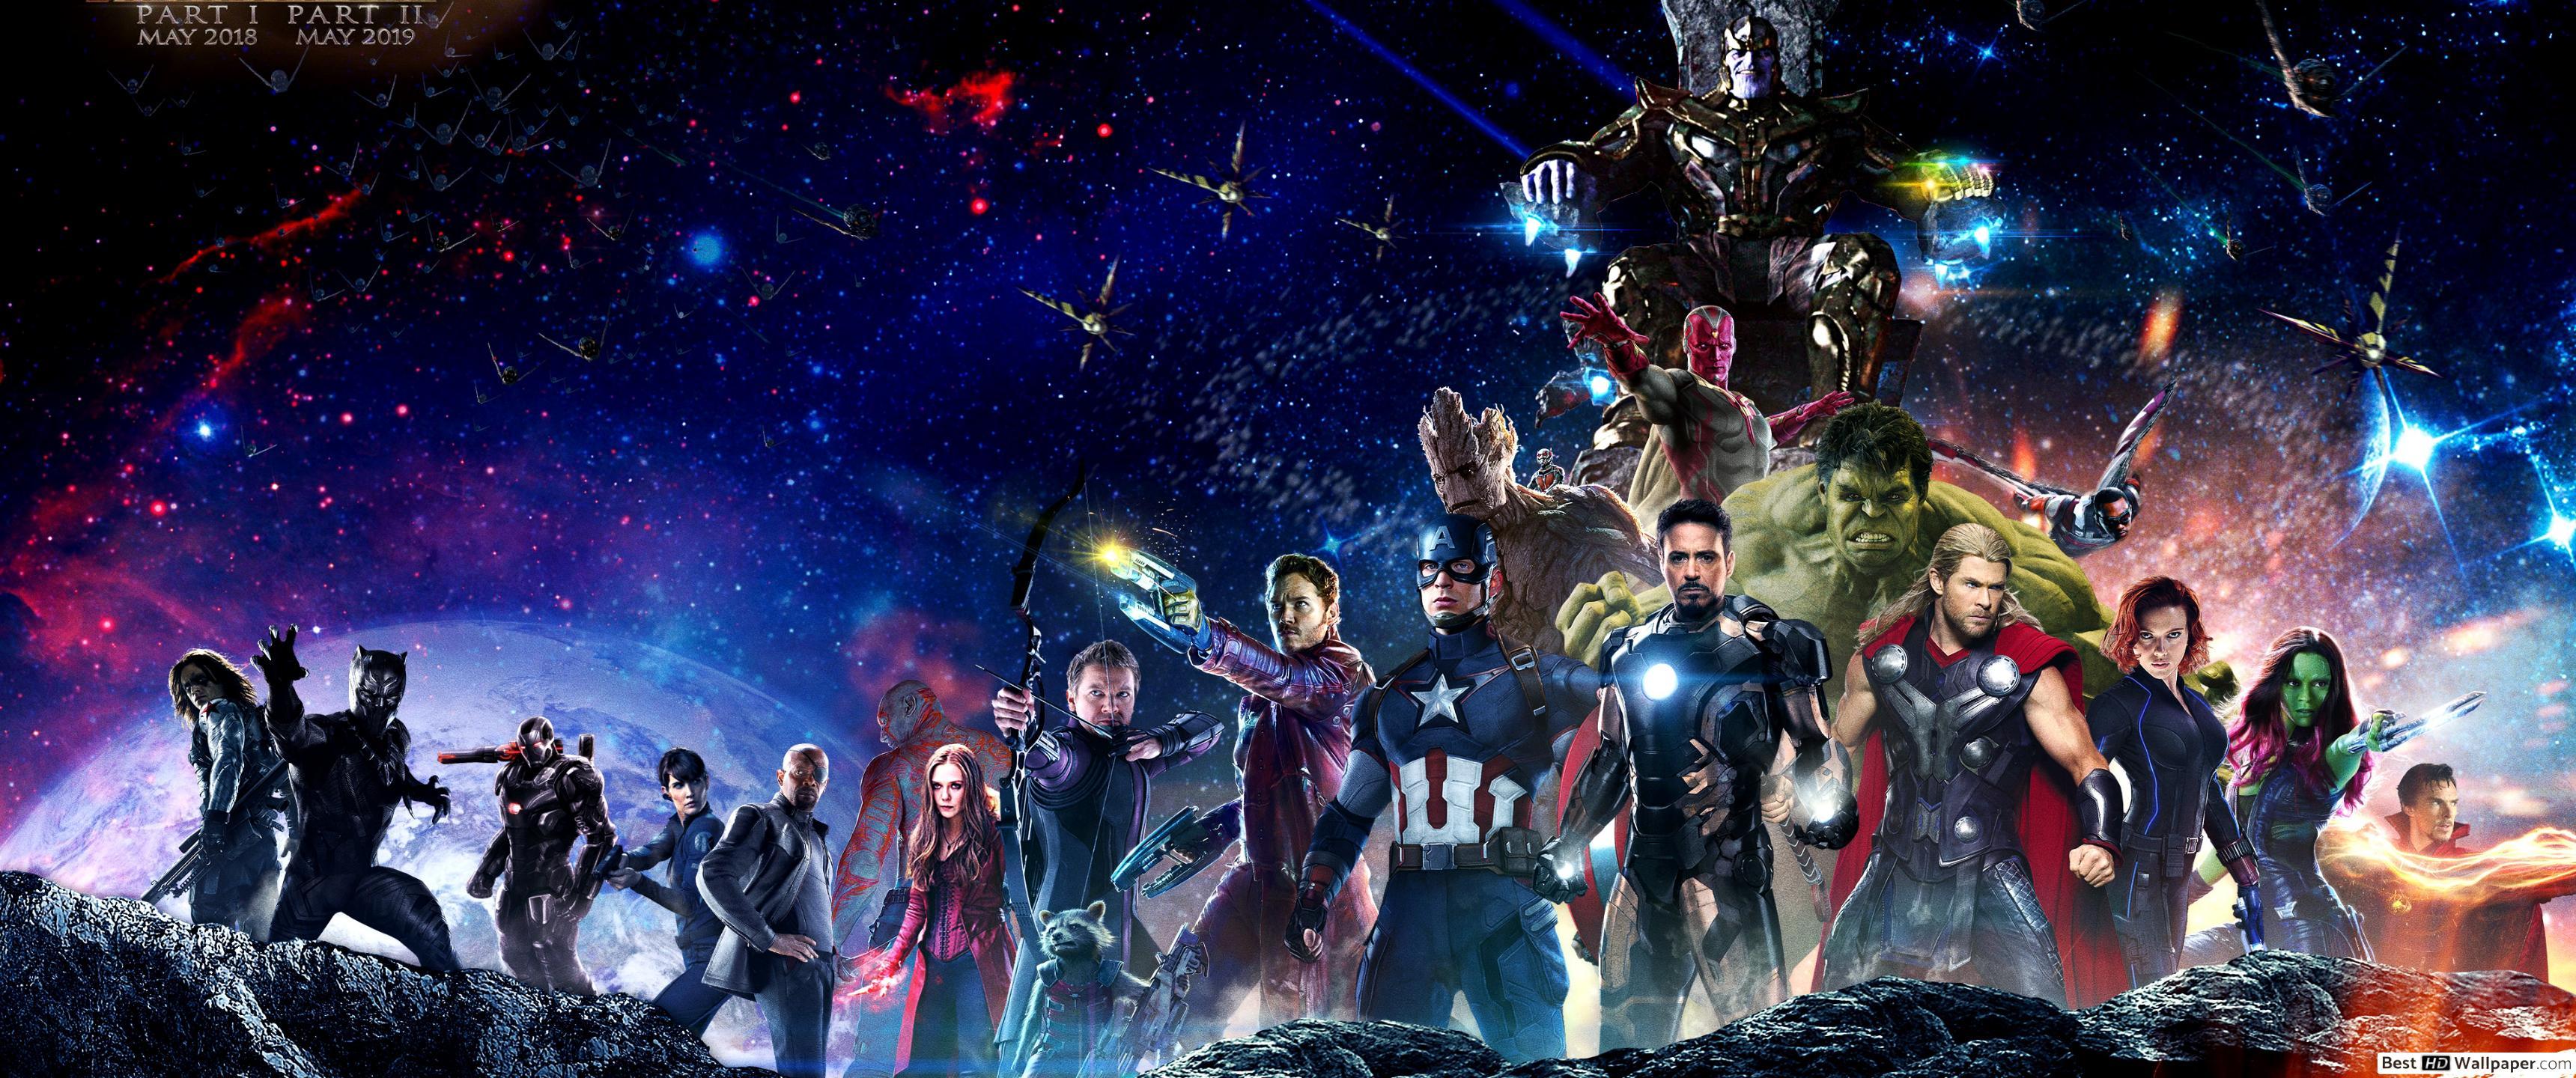 Avengers: Infinity war's heroes and villains HD wallpaper download